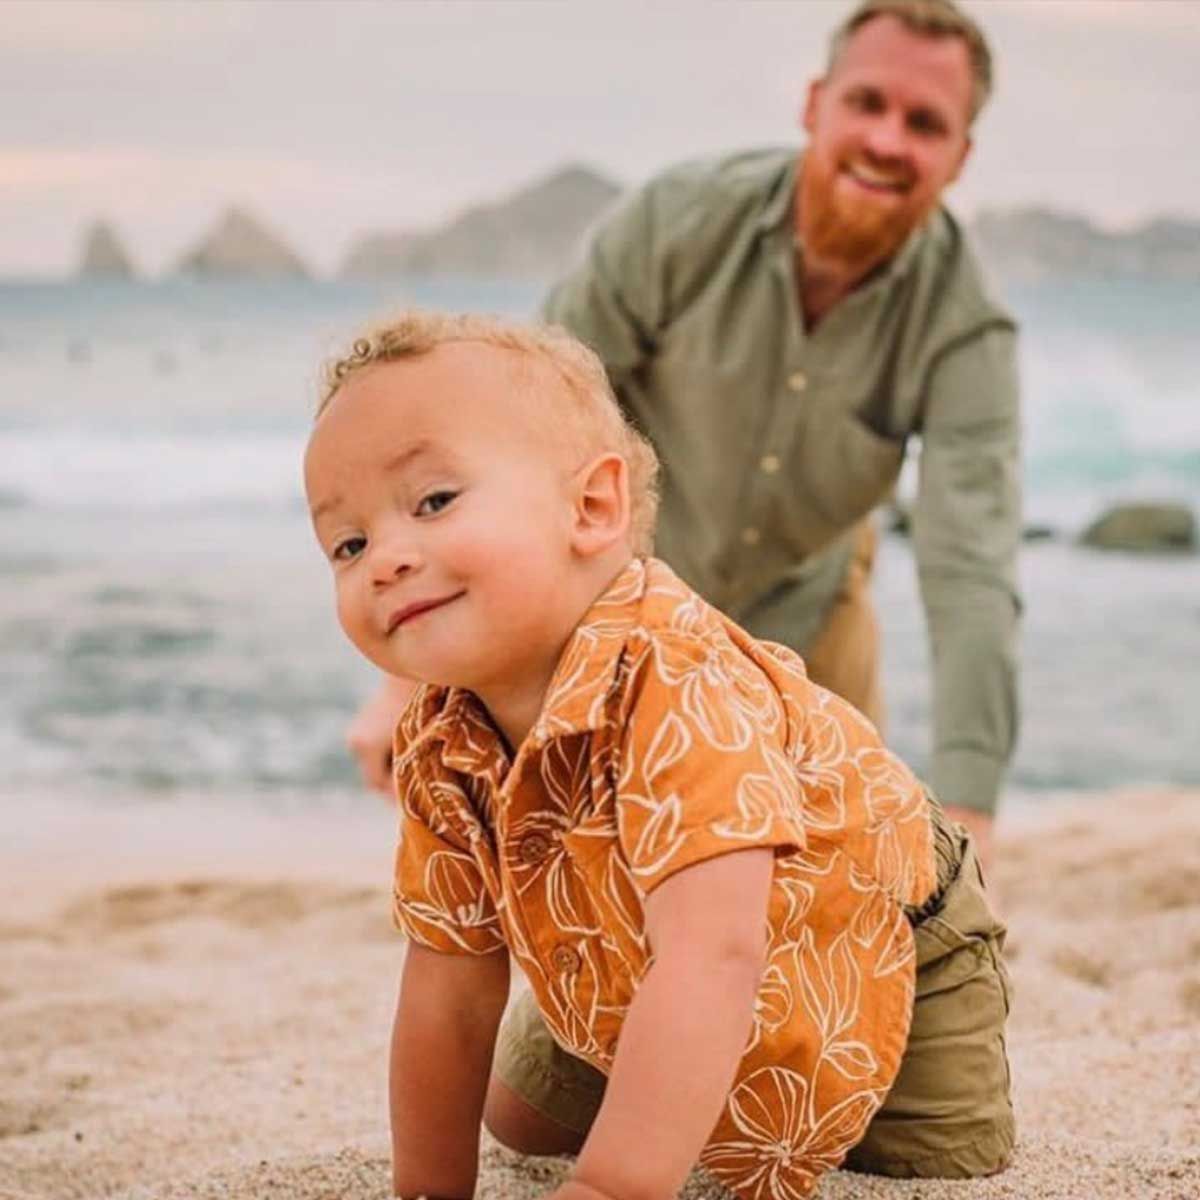 Life after a hiring a private chef, a little boy is crawling on the beach next to a man